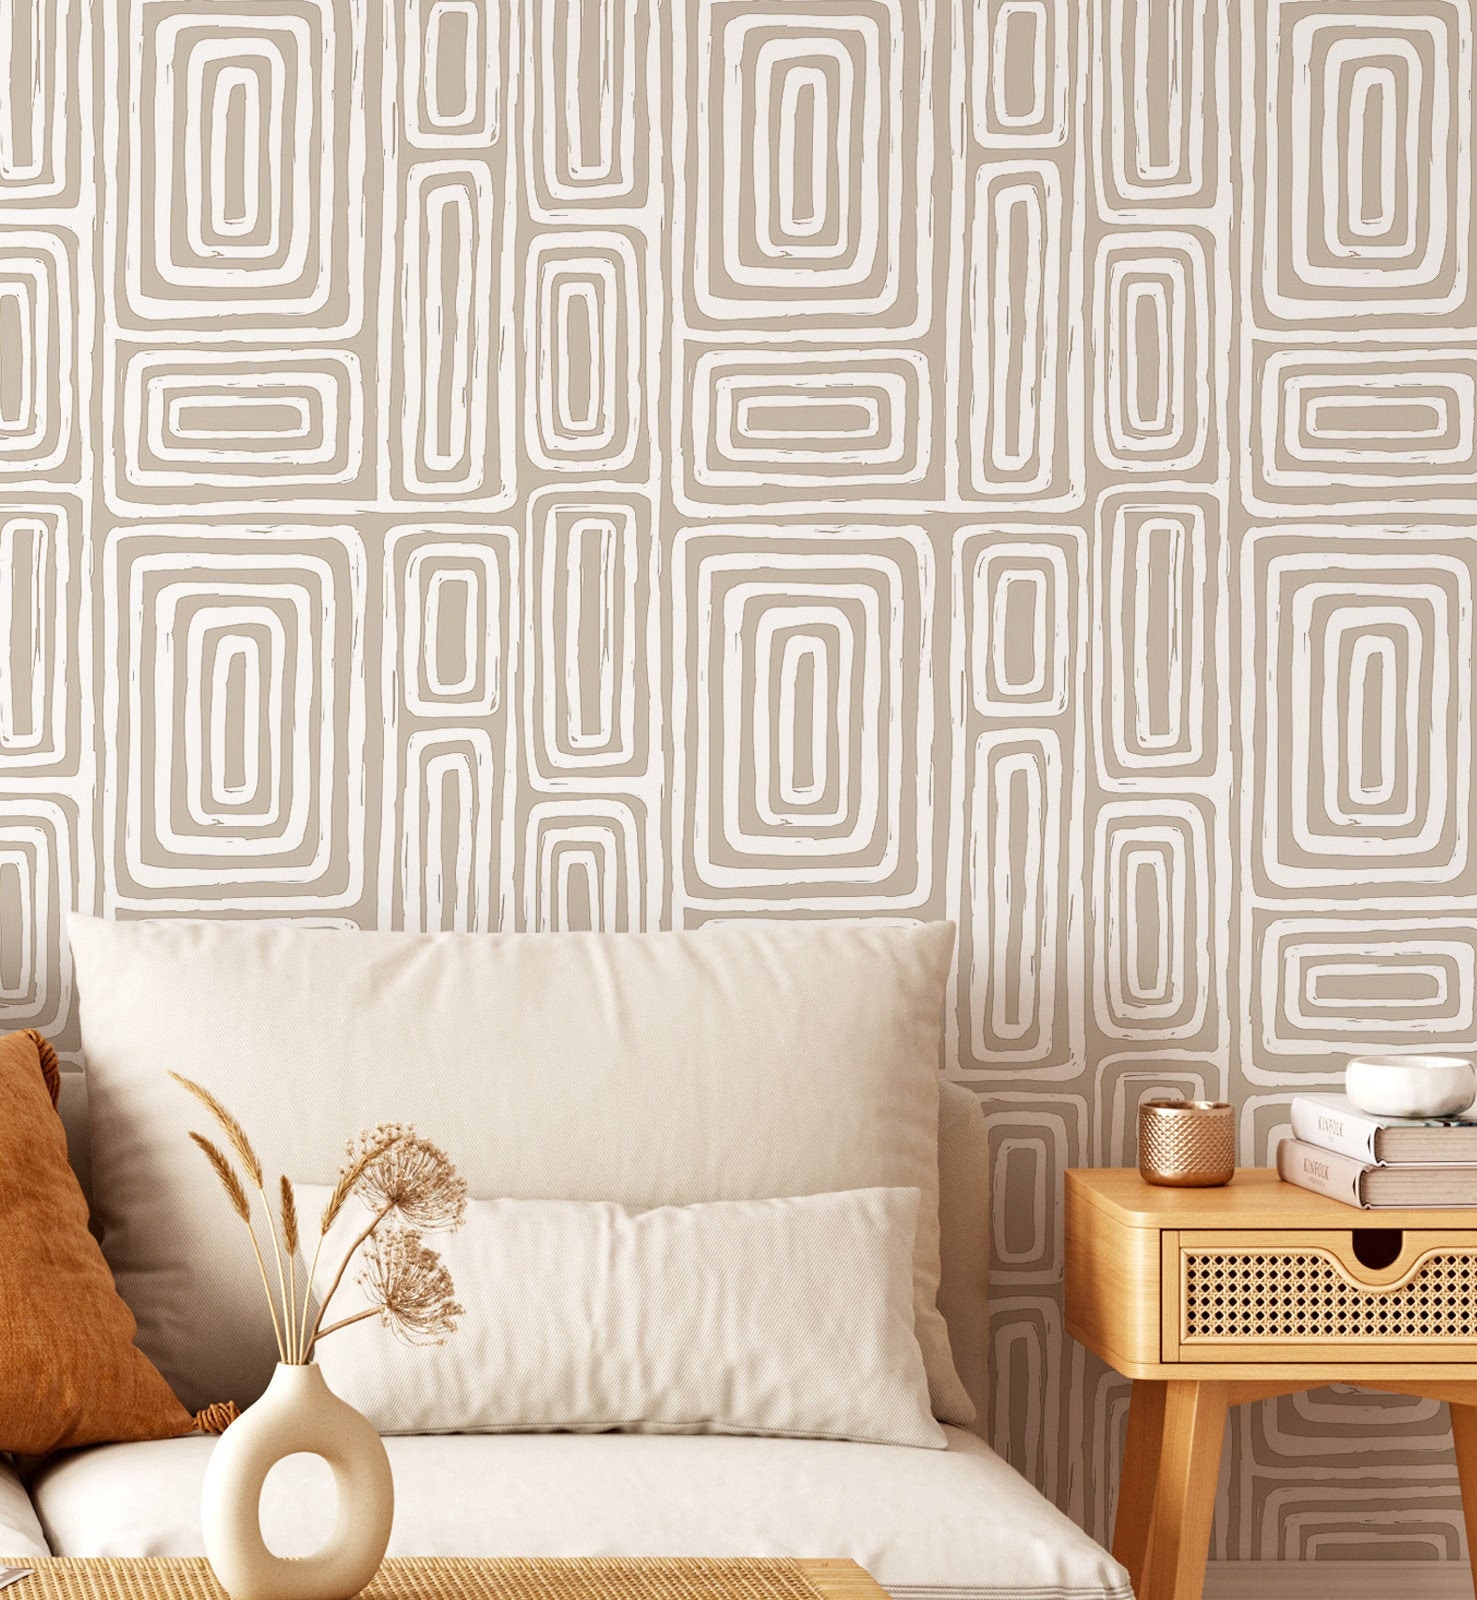 Sketchbook Geometric Wallpaper - SAMPLE ONLY – US Wall Decor